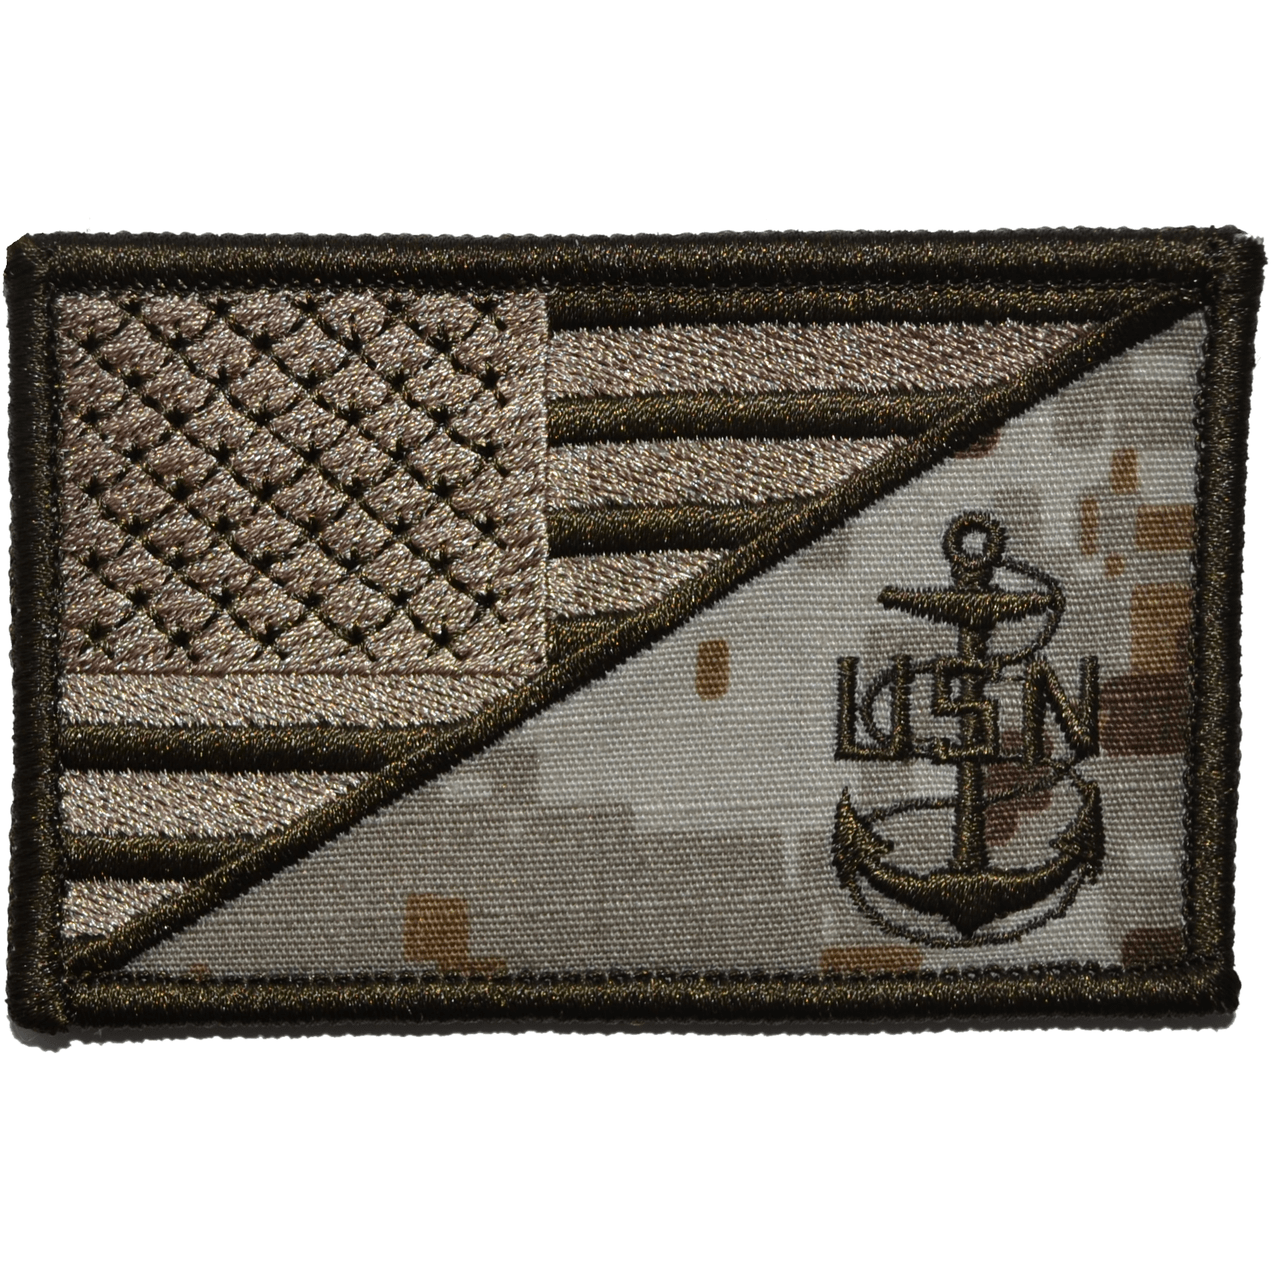 Tactical Gear Junkie Patches Navy Chief Petty Officer Anchor USA Flag - 2.25x3.5 Patch